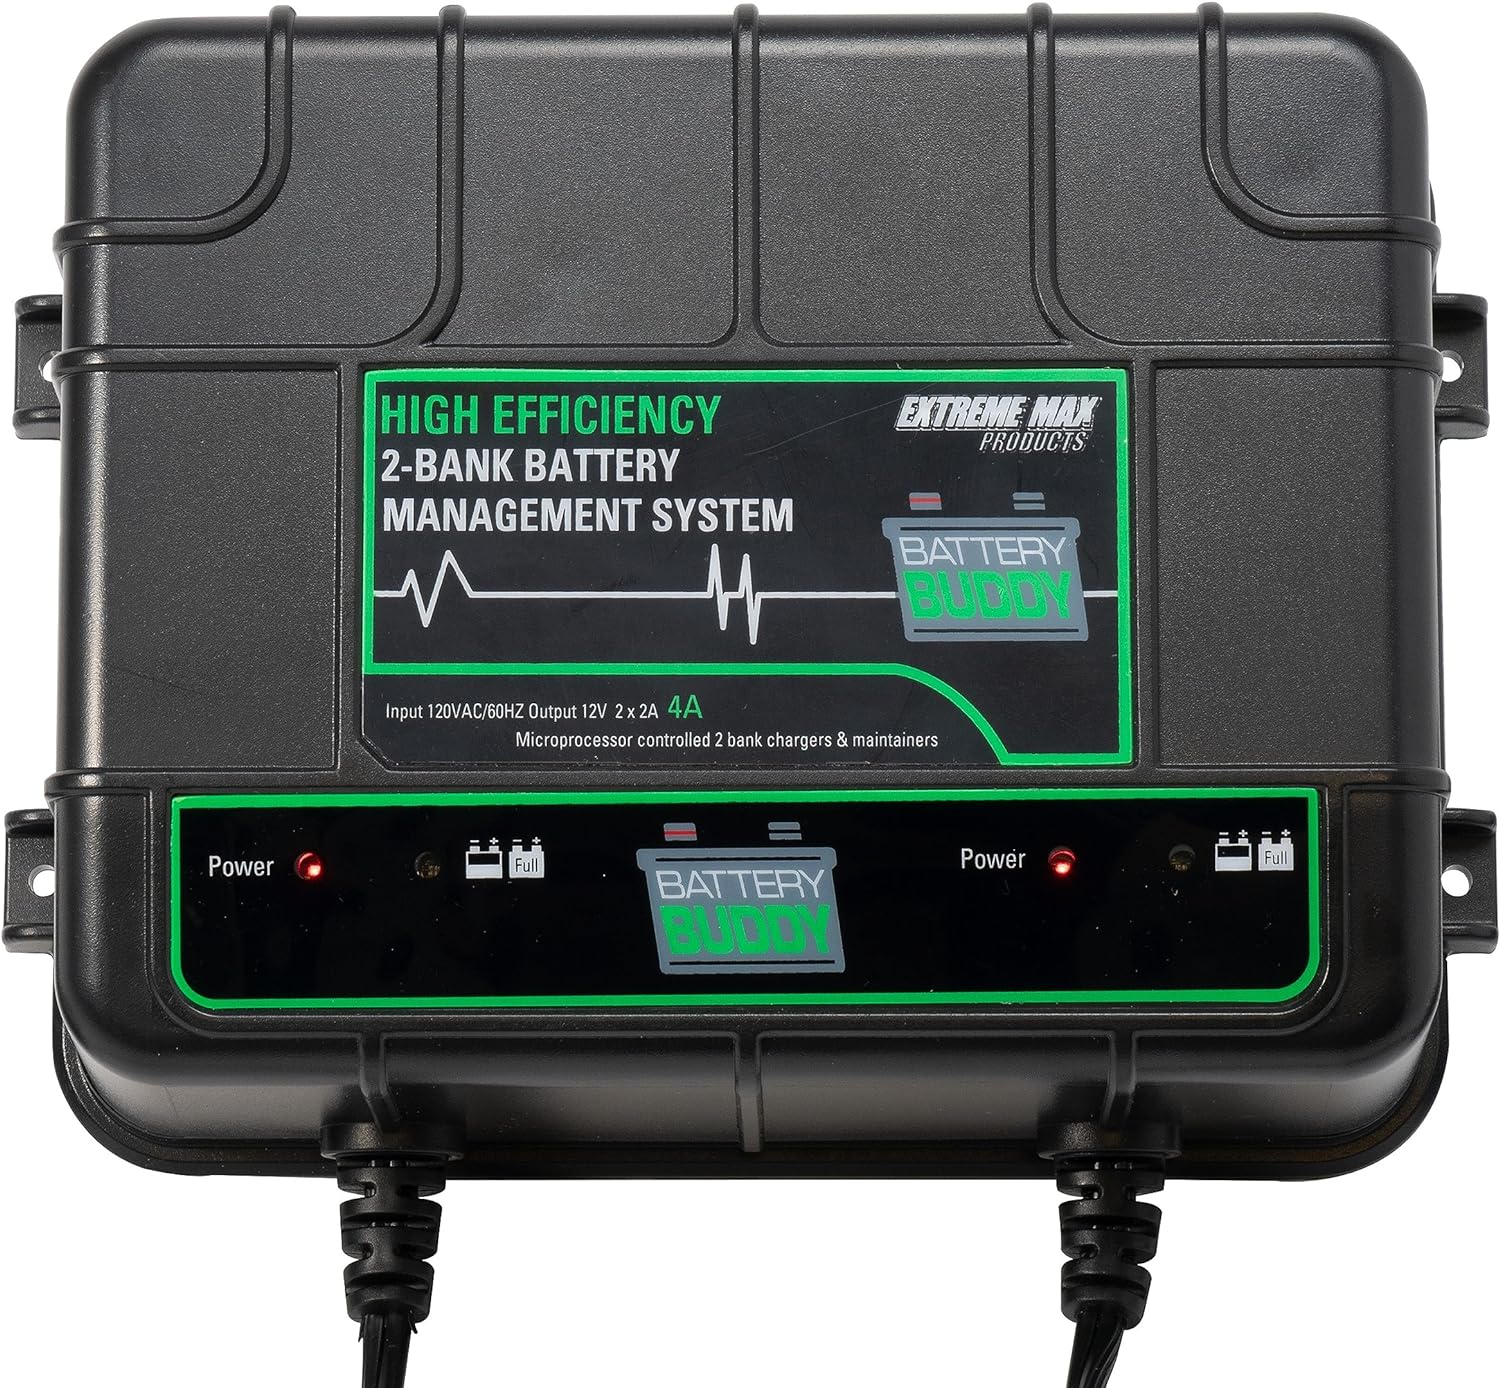 Extreme Max 1229.4023 Battery Buddy 4-Bank Battery Charger/Maintainer - Extreme Max Battery Buddy 4-Bank Battery Charger/Maintainer Review